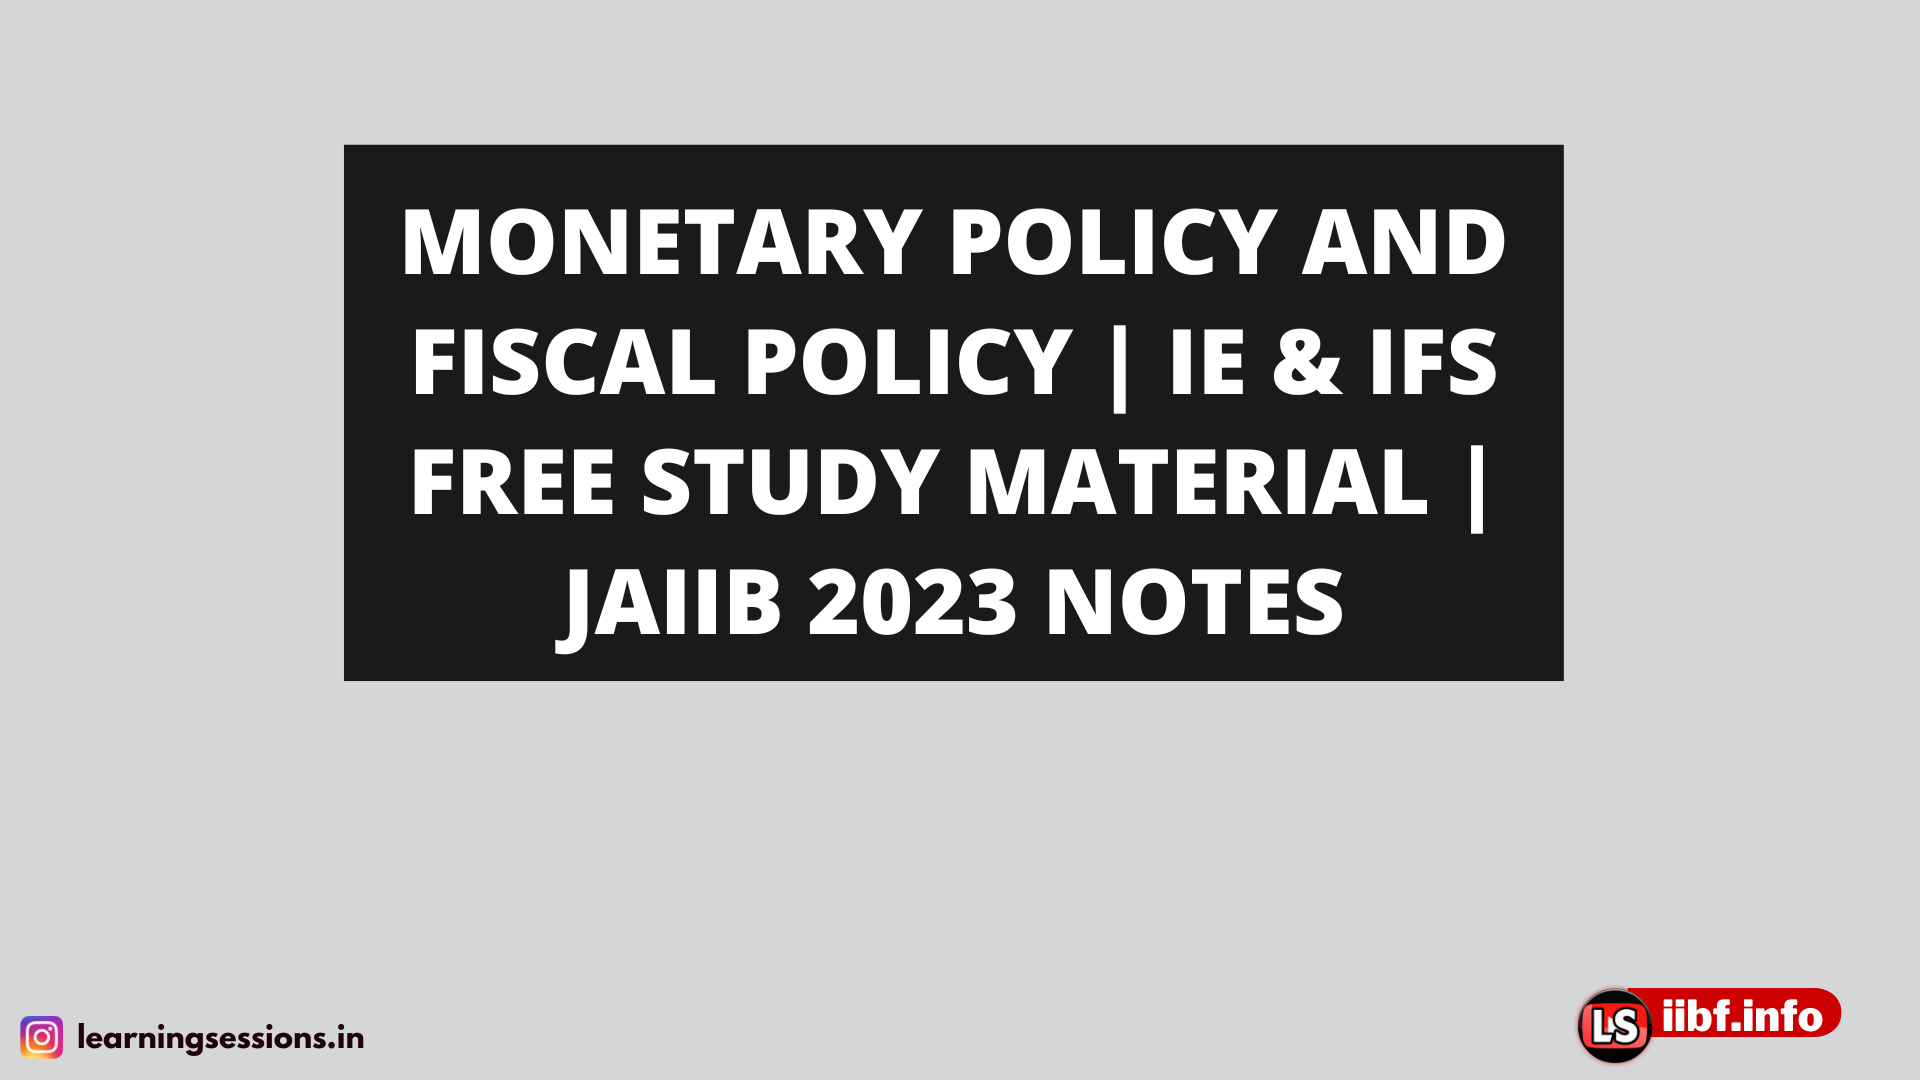 MONETARY POLICY AND FISCAL POLICY | IE & IFS FREE STUDY MATERIAL | JAIIB 2023 NOTES